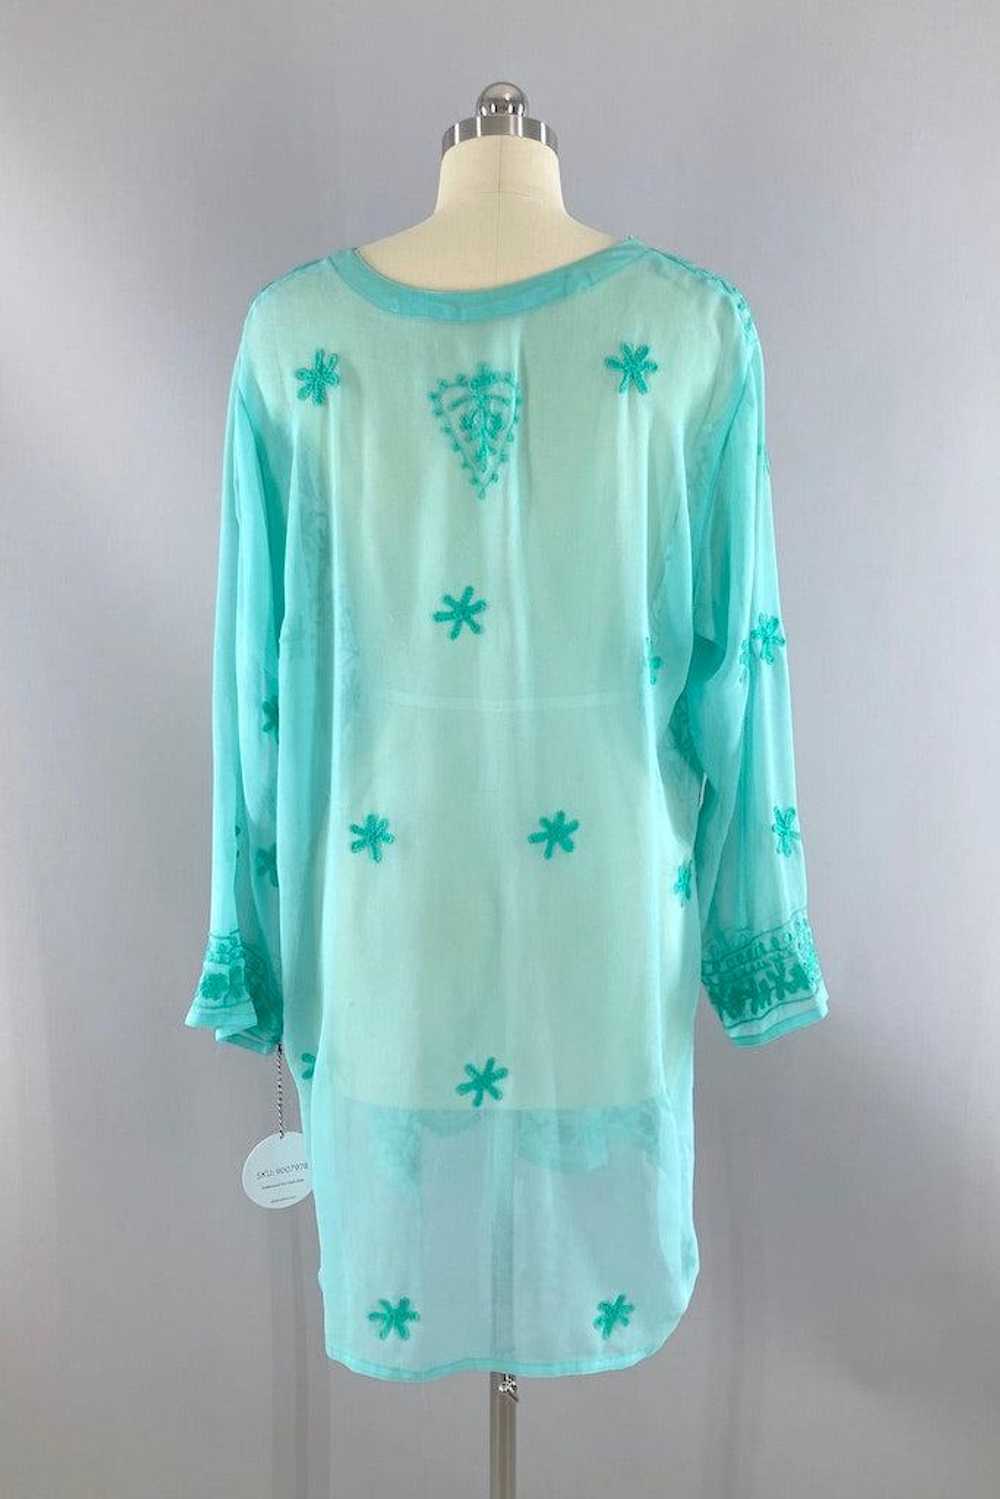 Vintage Embroidered Sheer Tunic - image 6